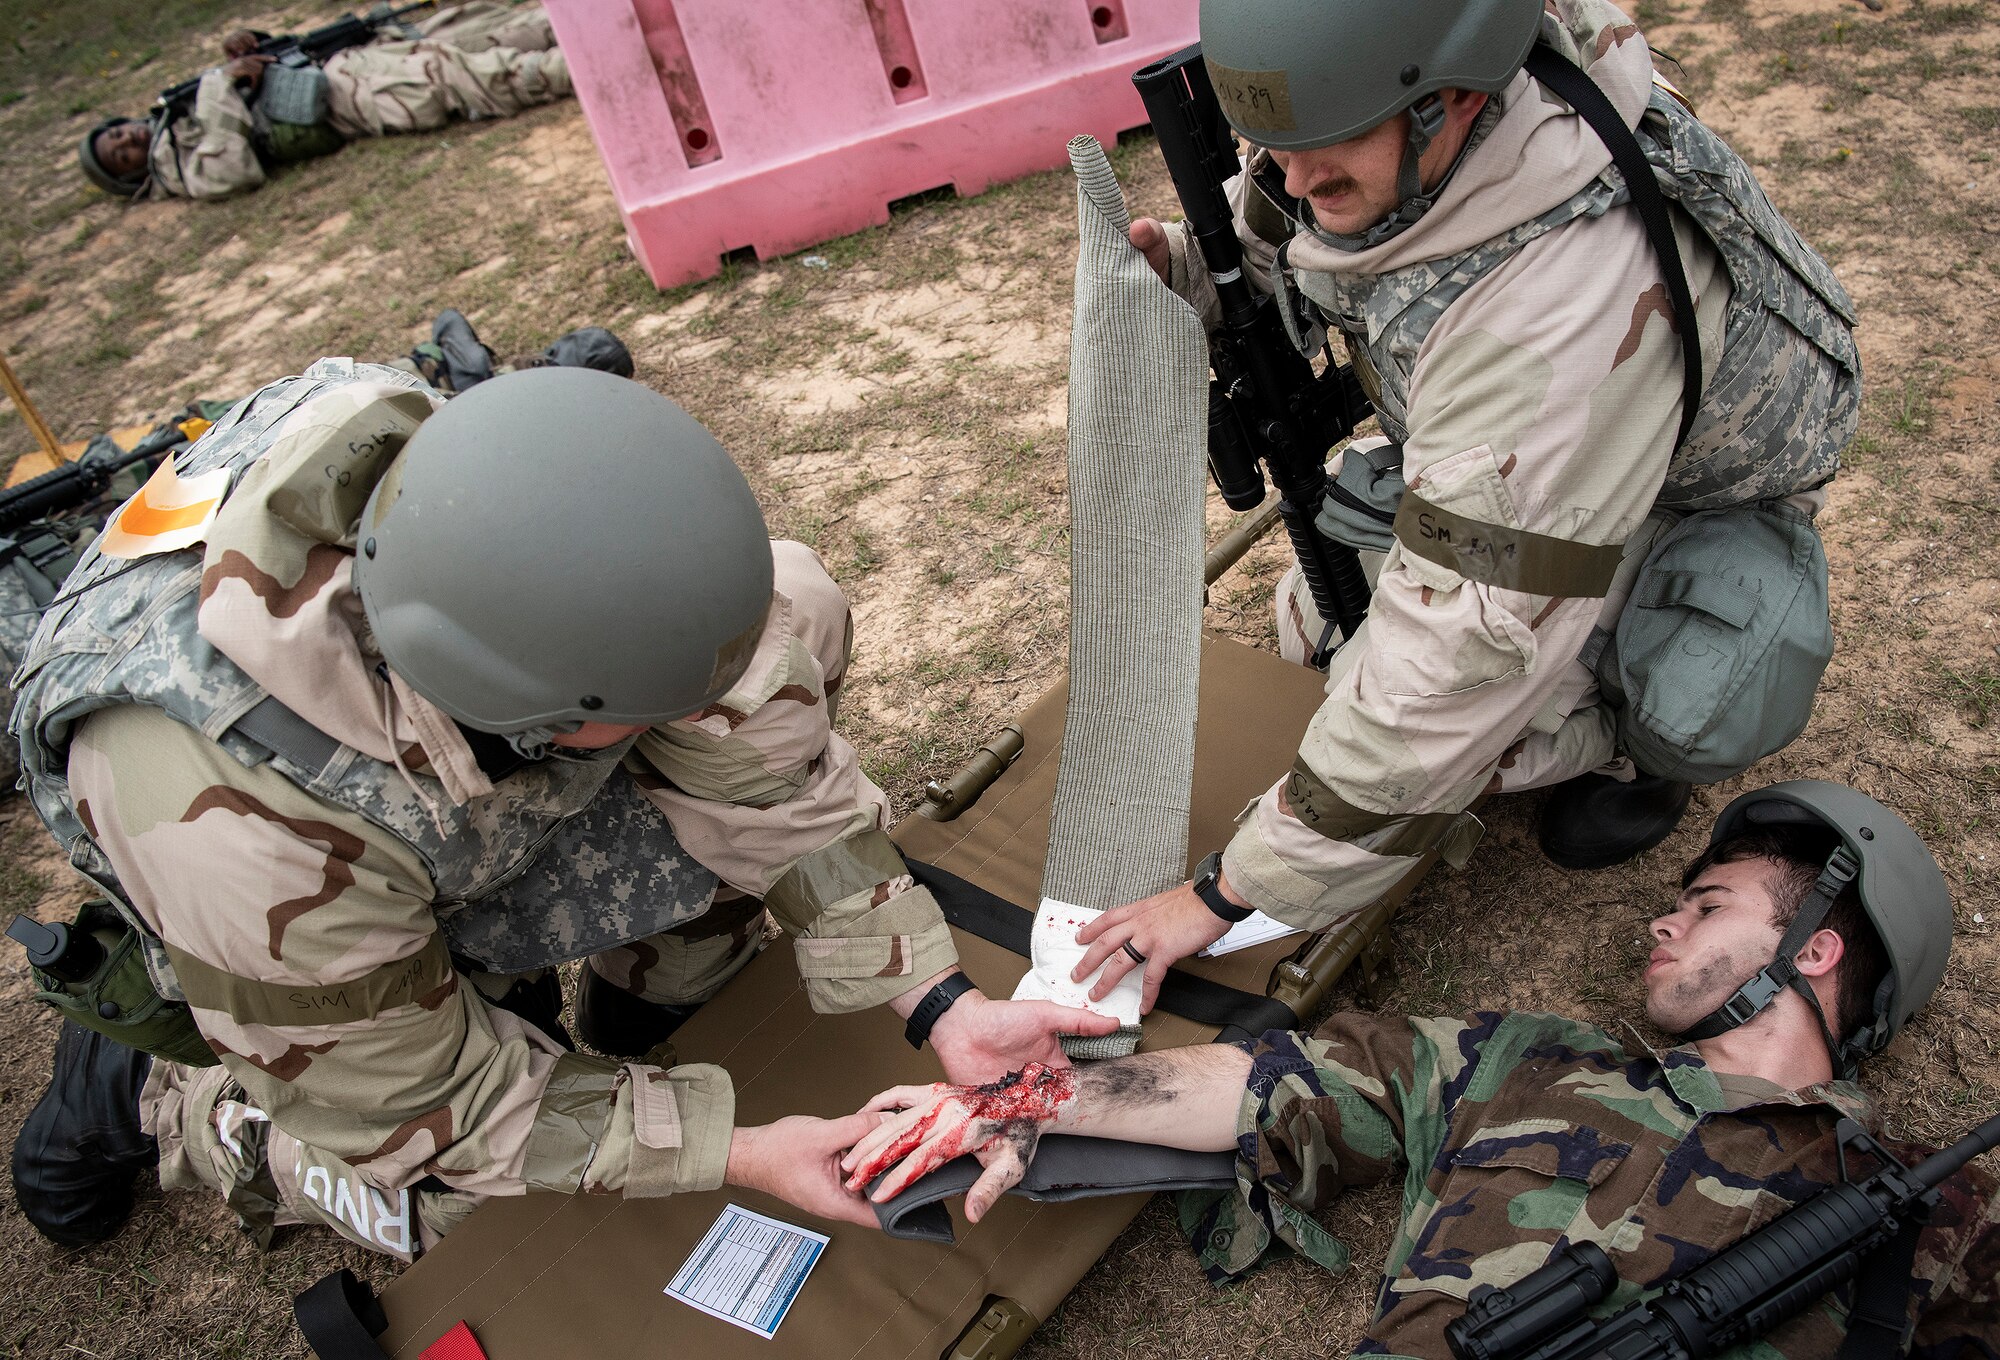 Airmen provide care to a victim’s fractured arm during a chemical, biological, radiological, nuclear and explosive exercise at Eglin Air Force Base, Florida, Nov. 7. The Air Force Materiel Command evaluation exercised the Airmen’s ability to meet wartime and contingency taskings of employing and sustaining the force and the ability to survive and operate. (U.S. Air Force photo by Samuel King Jr.)